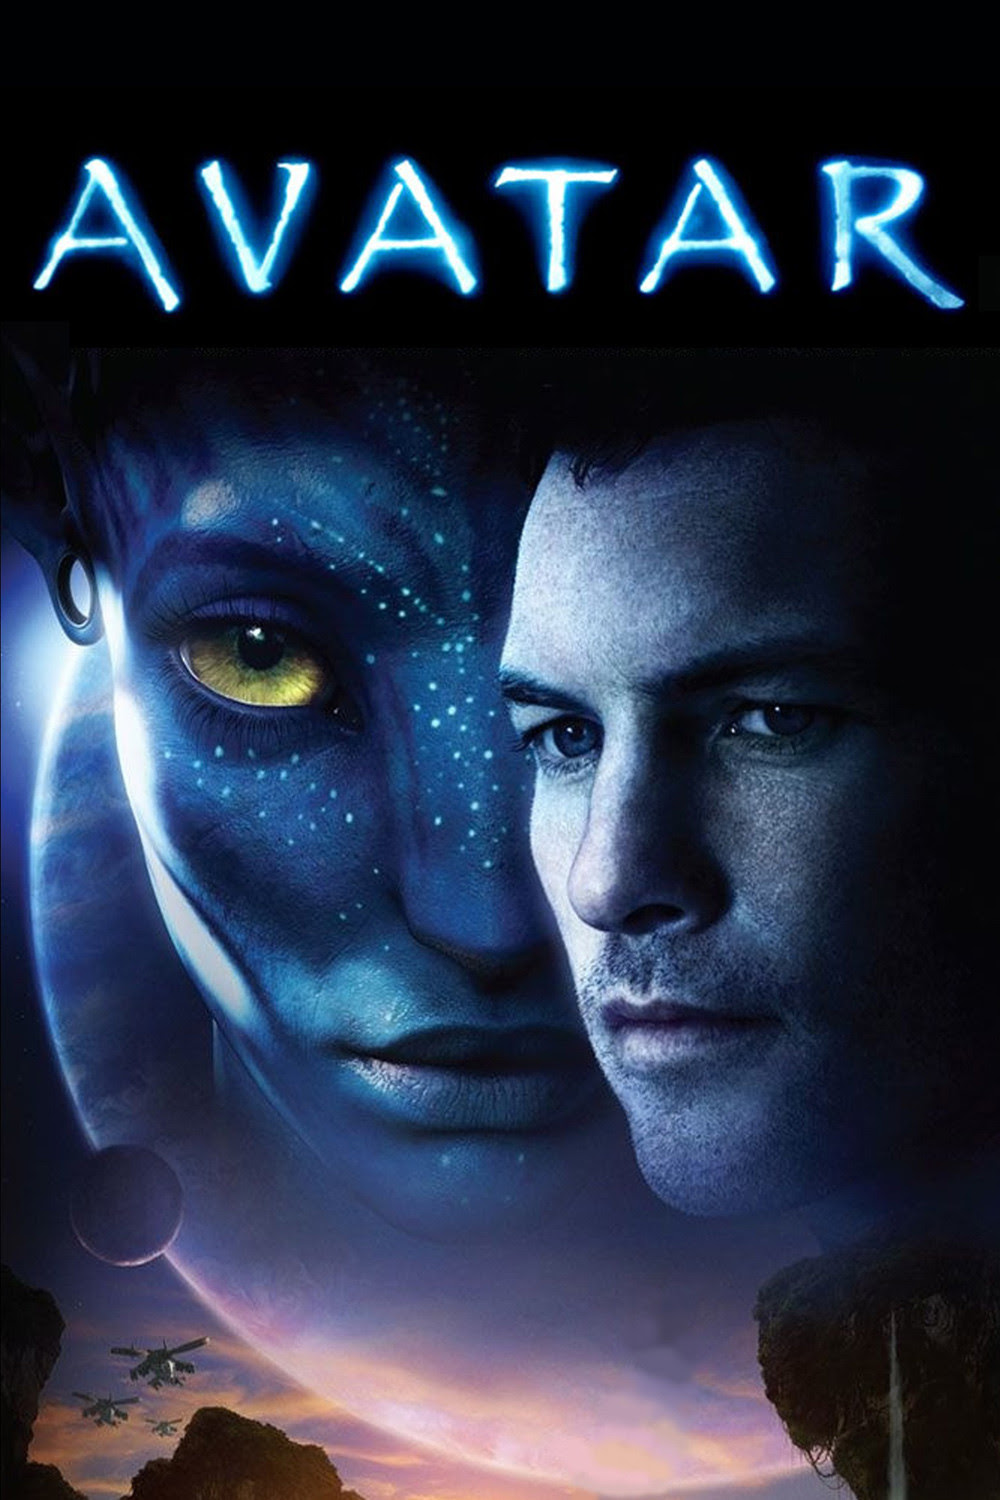 Avatar 4 announced; first sequel coming in 2016 - Eggplante!